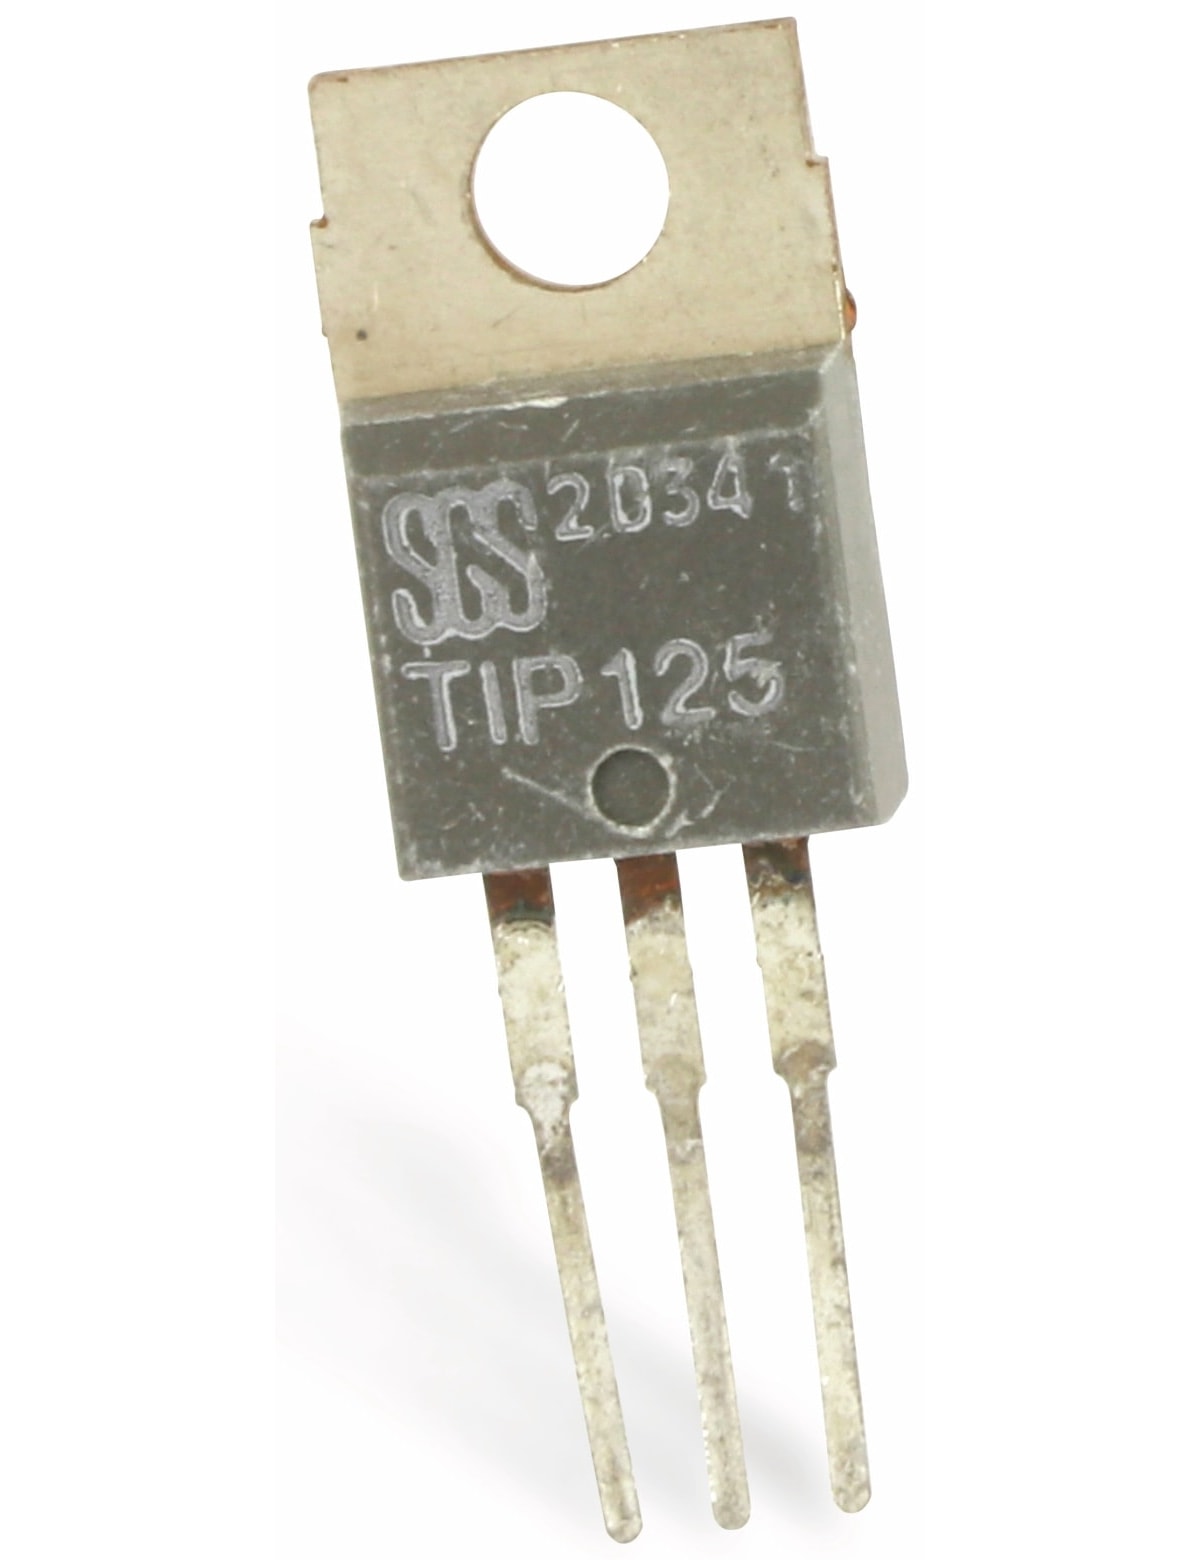 ST MICROELECTRONICS Transistor TIP125, PNP-Darl., 60V, 5A, 65W, TO220